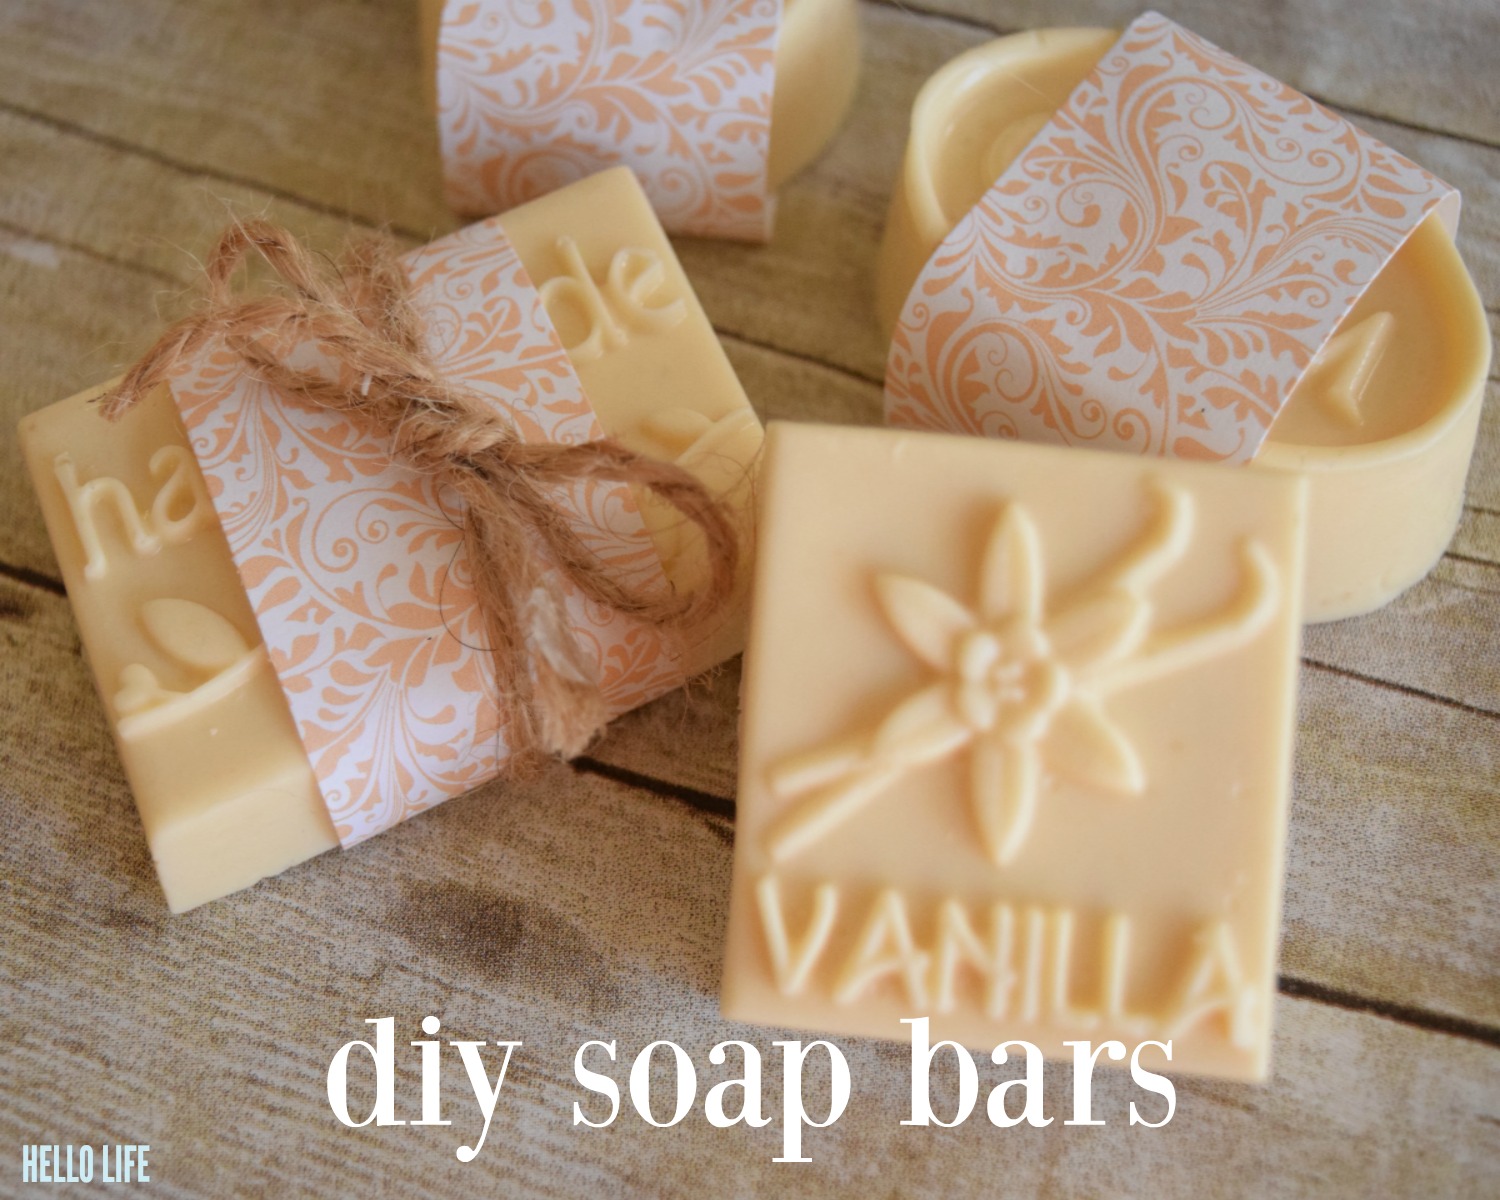 DIY Soap Bars- Make your own soap bars with this easy to follow recipe, perfect for beginners!